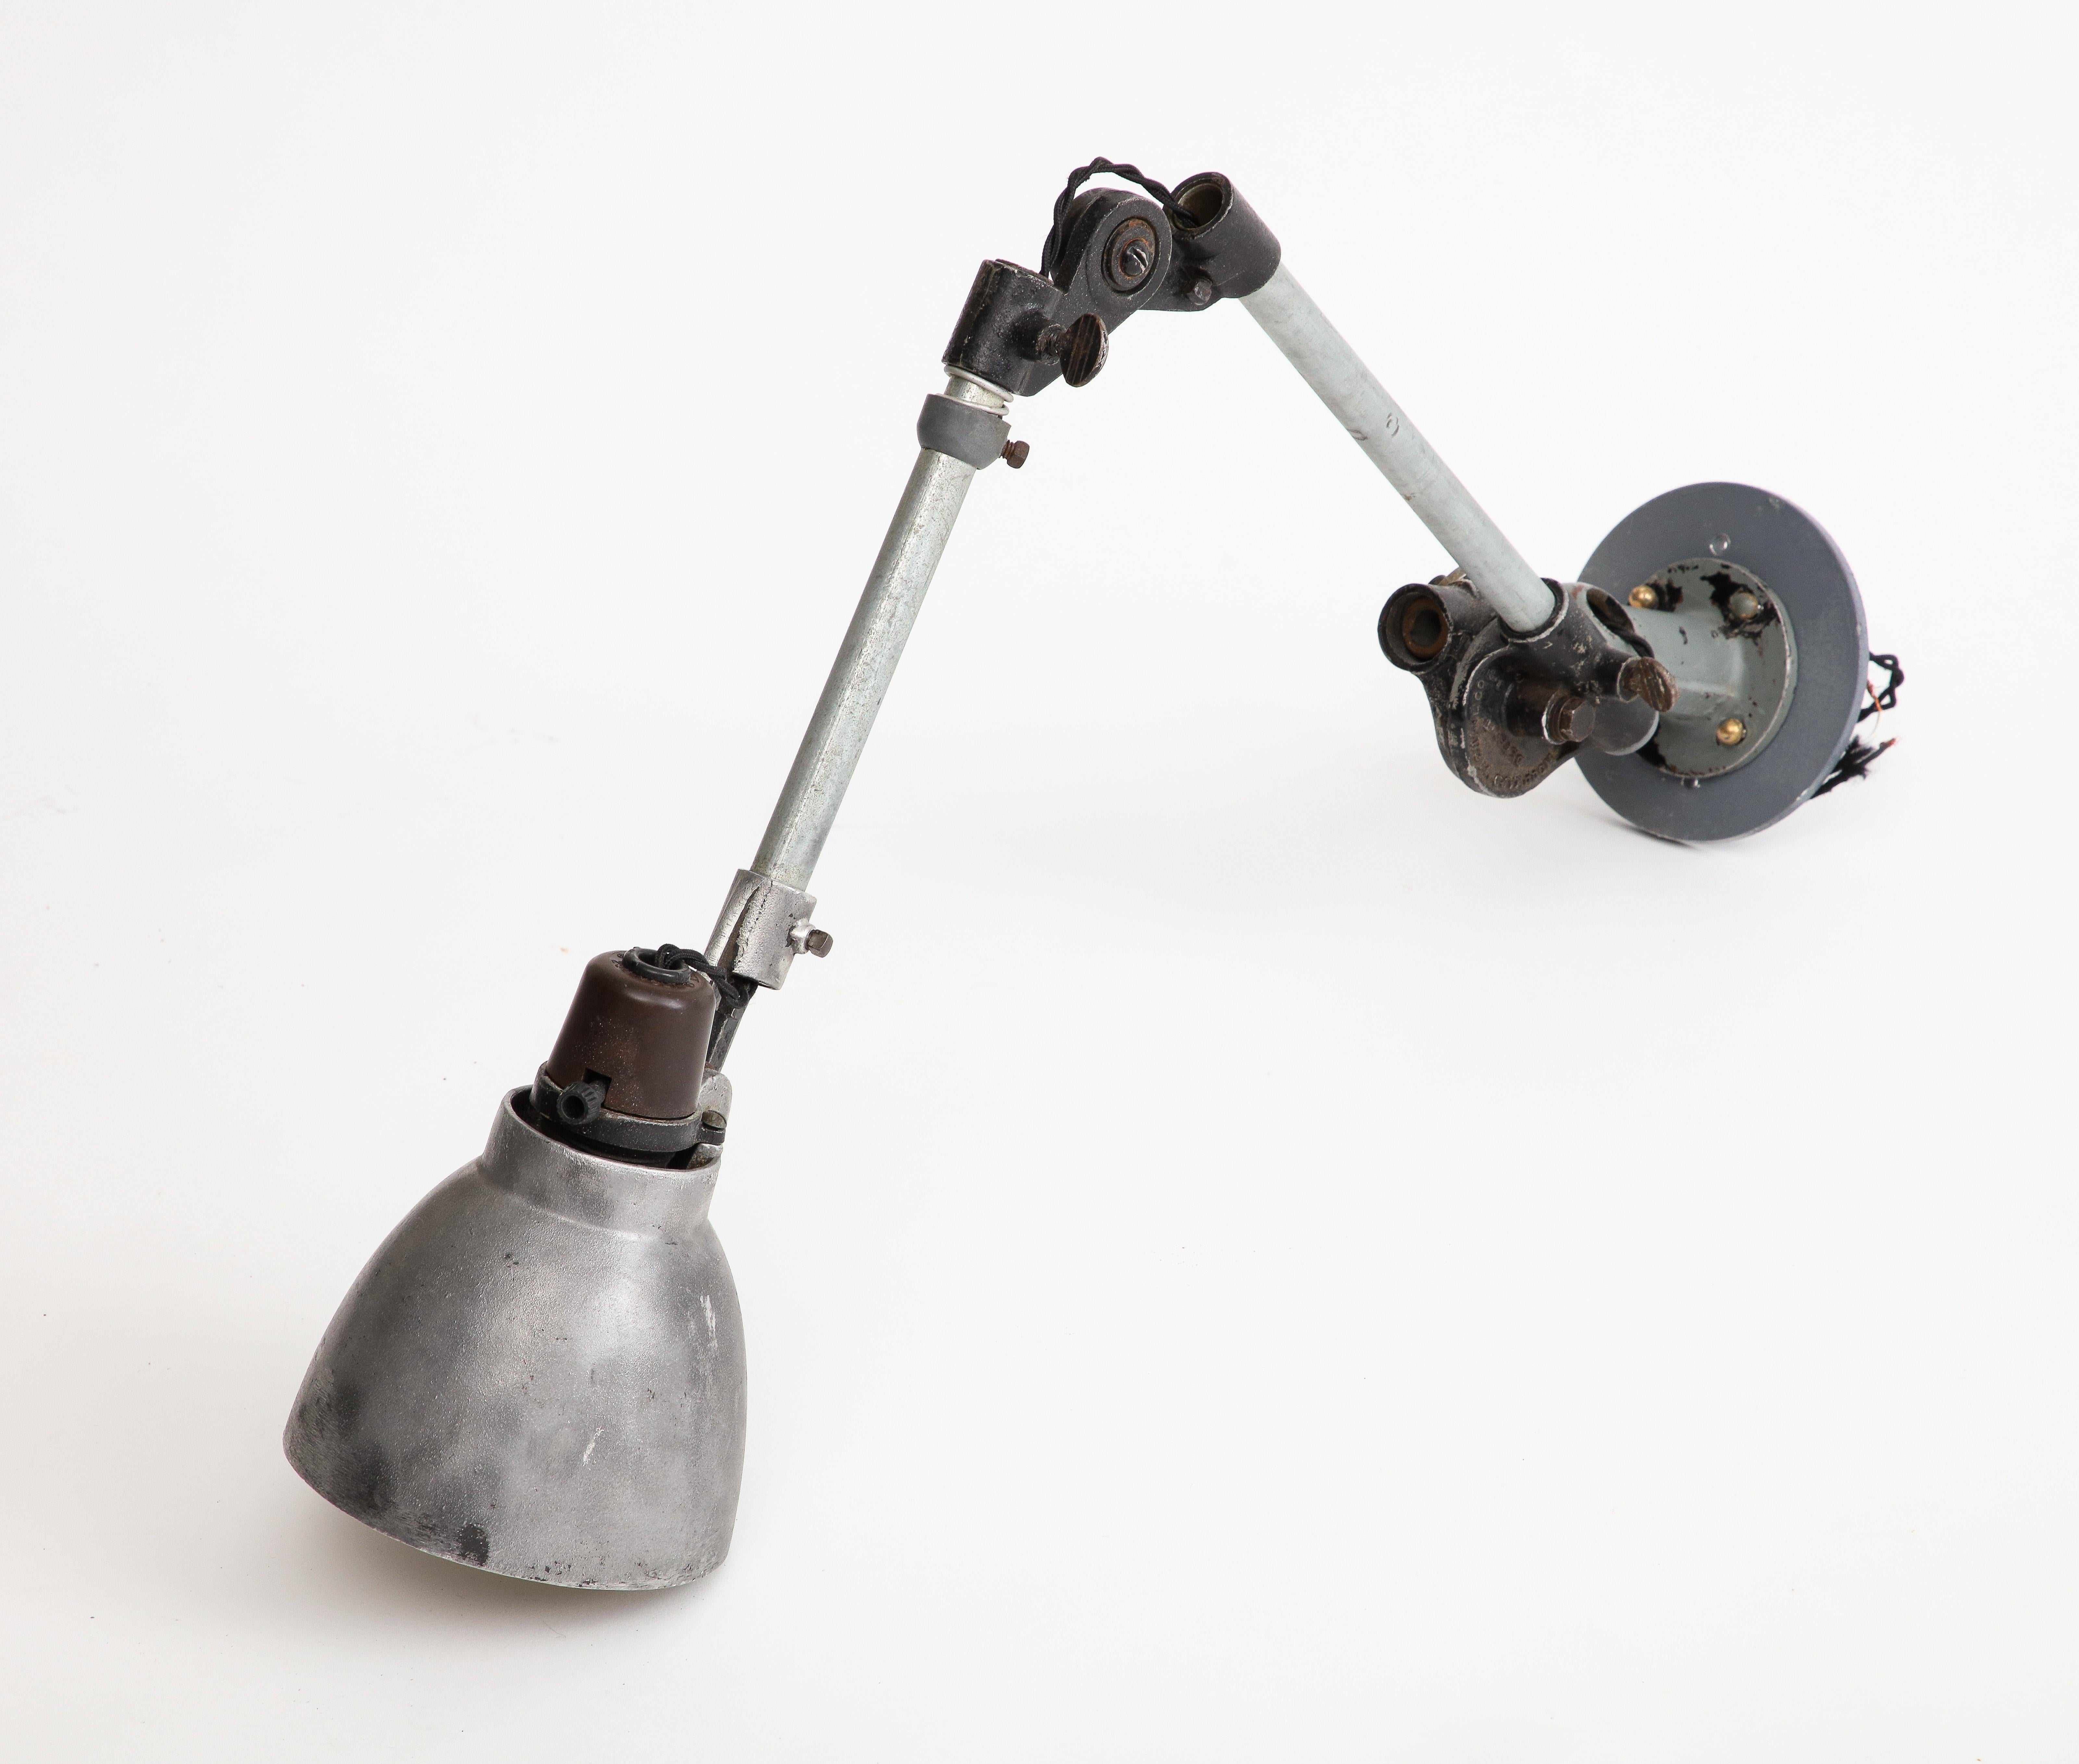 Industrial Anglepoise wall-mounted cast iron sconce, c. 1940. 

The Anglepoise lamp is a balanced-arm lamp designed in 1932 by British designer George Carwardine. 

33